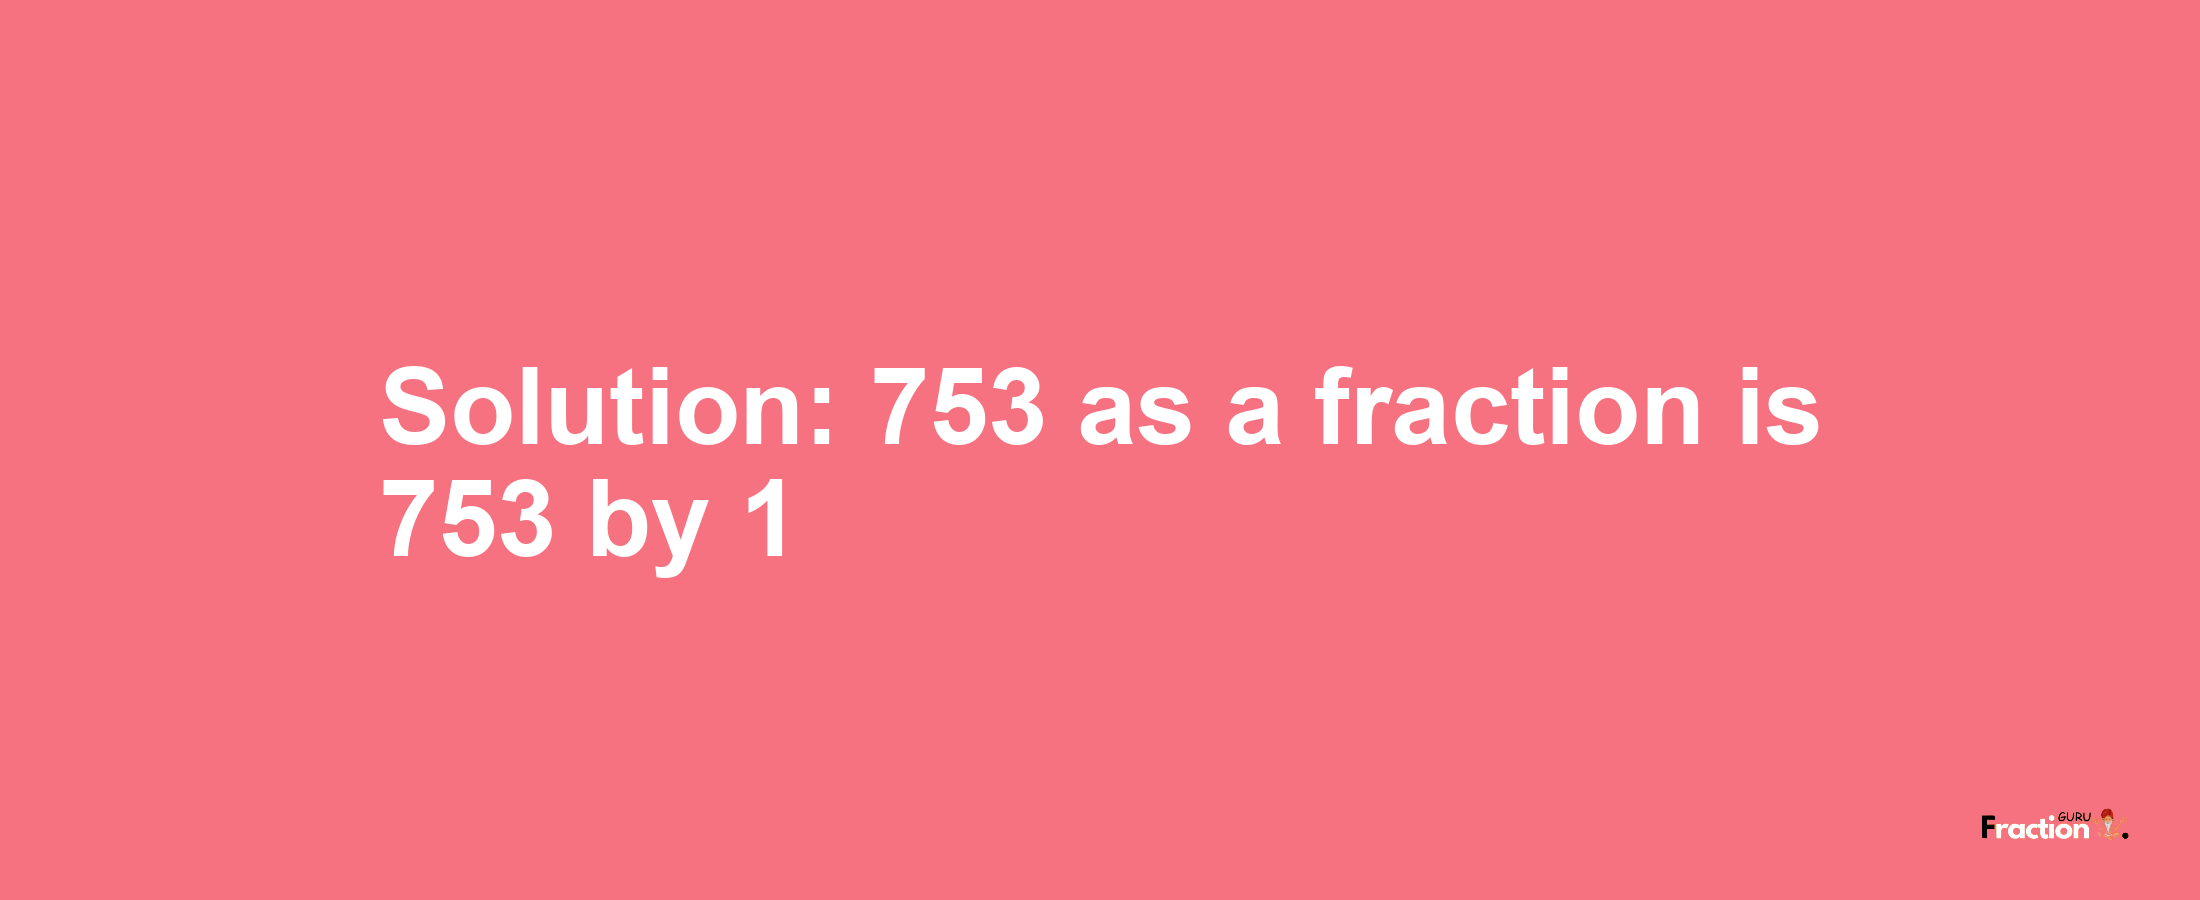 Solution:753 as a fraction is 753/1